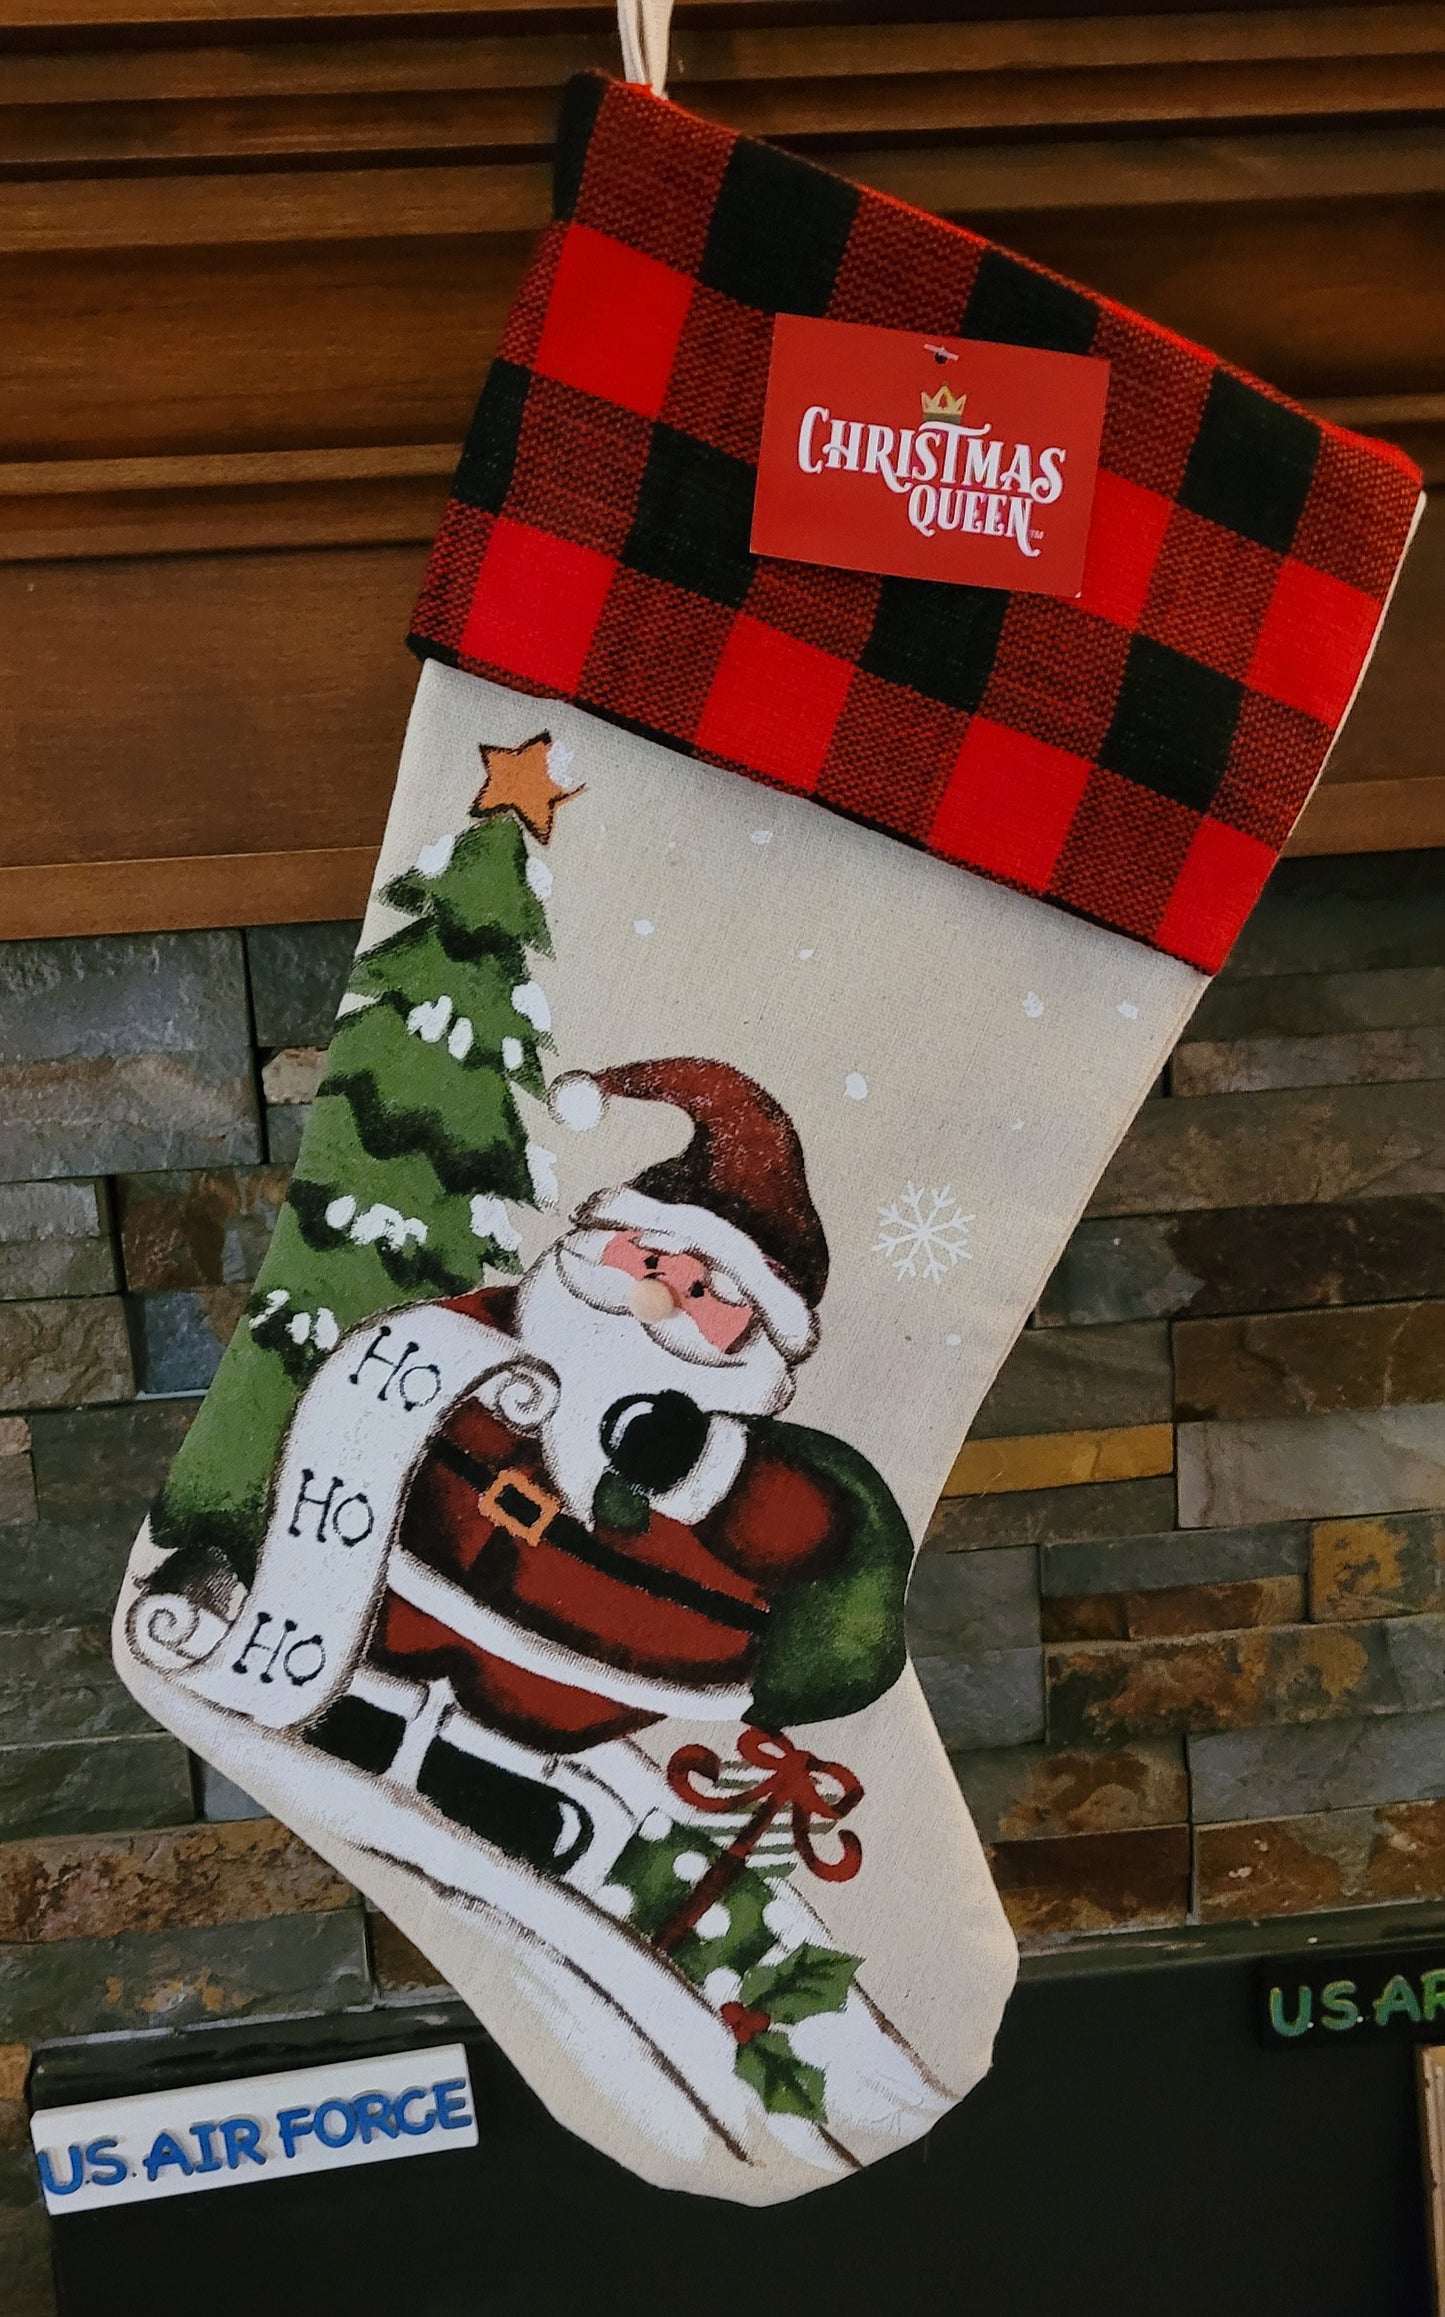 Christmas Queen's 18" Holiday Stocking w/ Santa Claus Checking His List